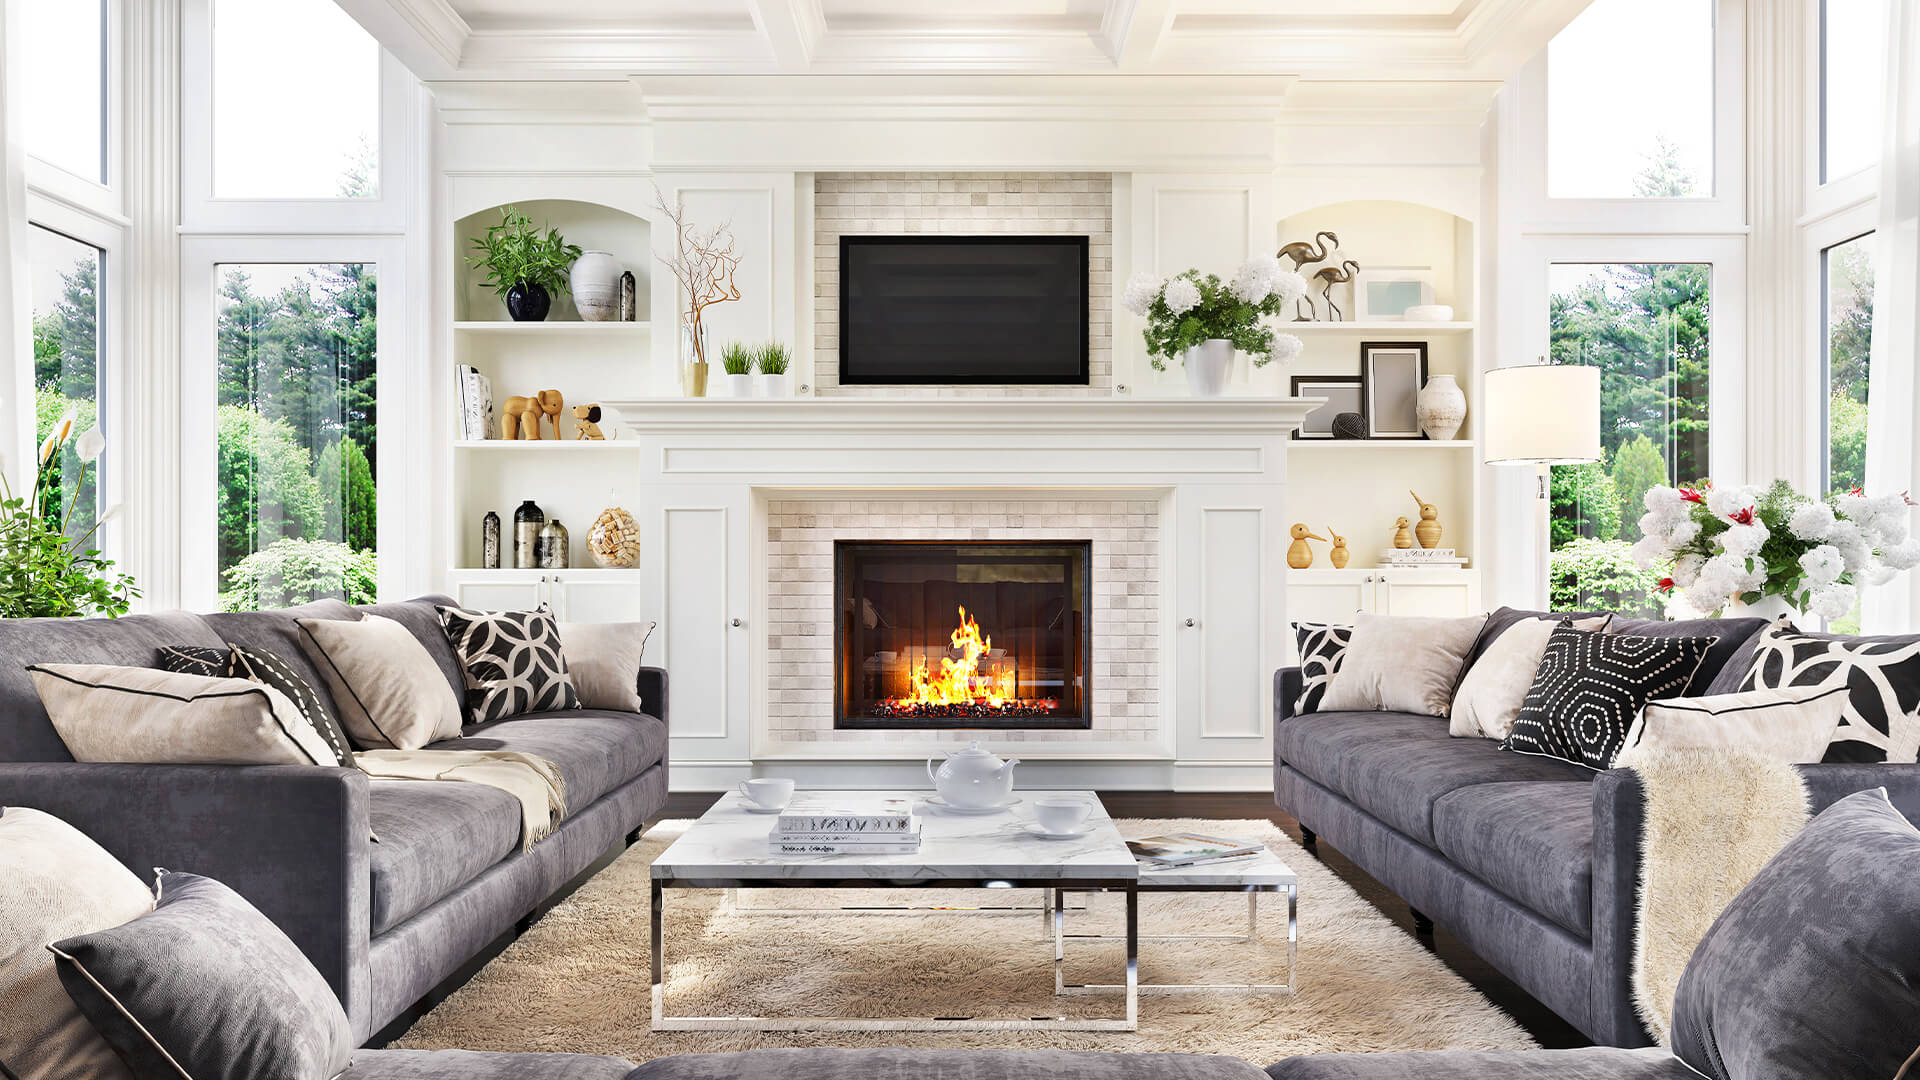 Stunning Yet Simple Design Ideas That, How To Make Your Living Room Luxurious